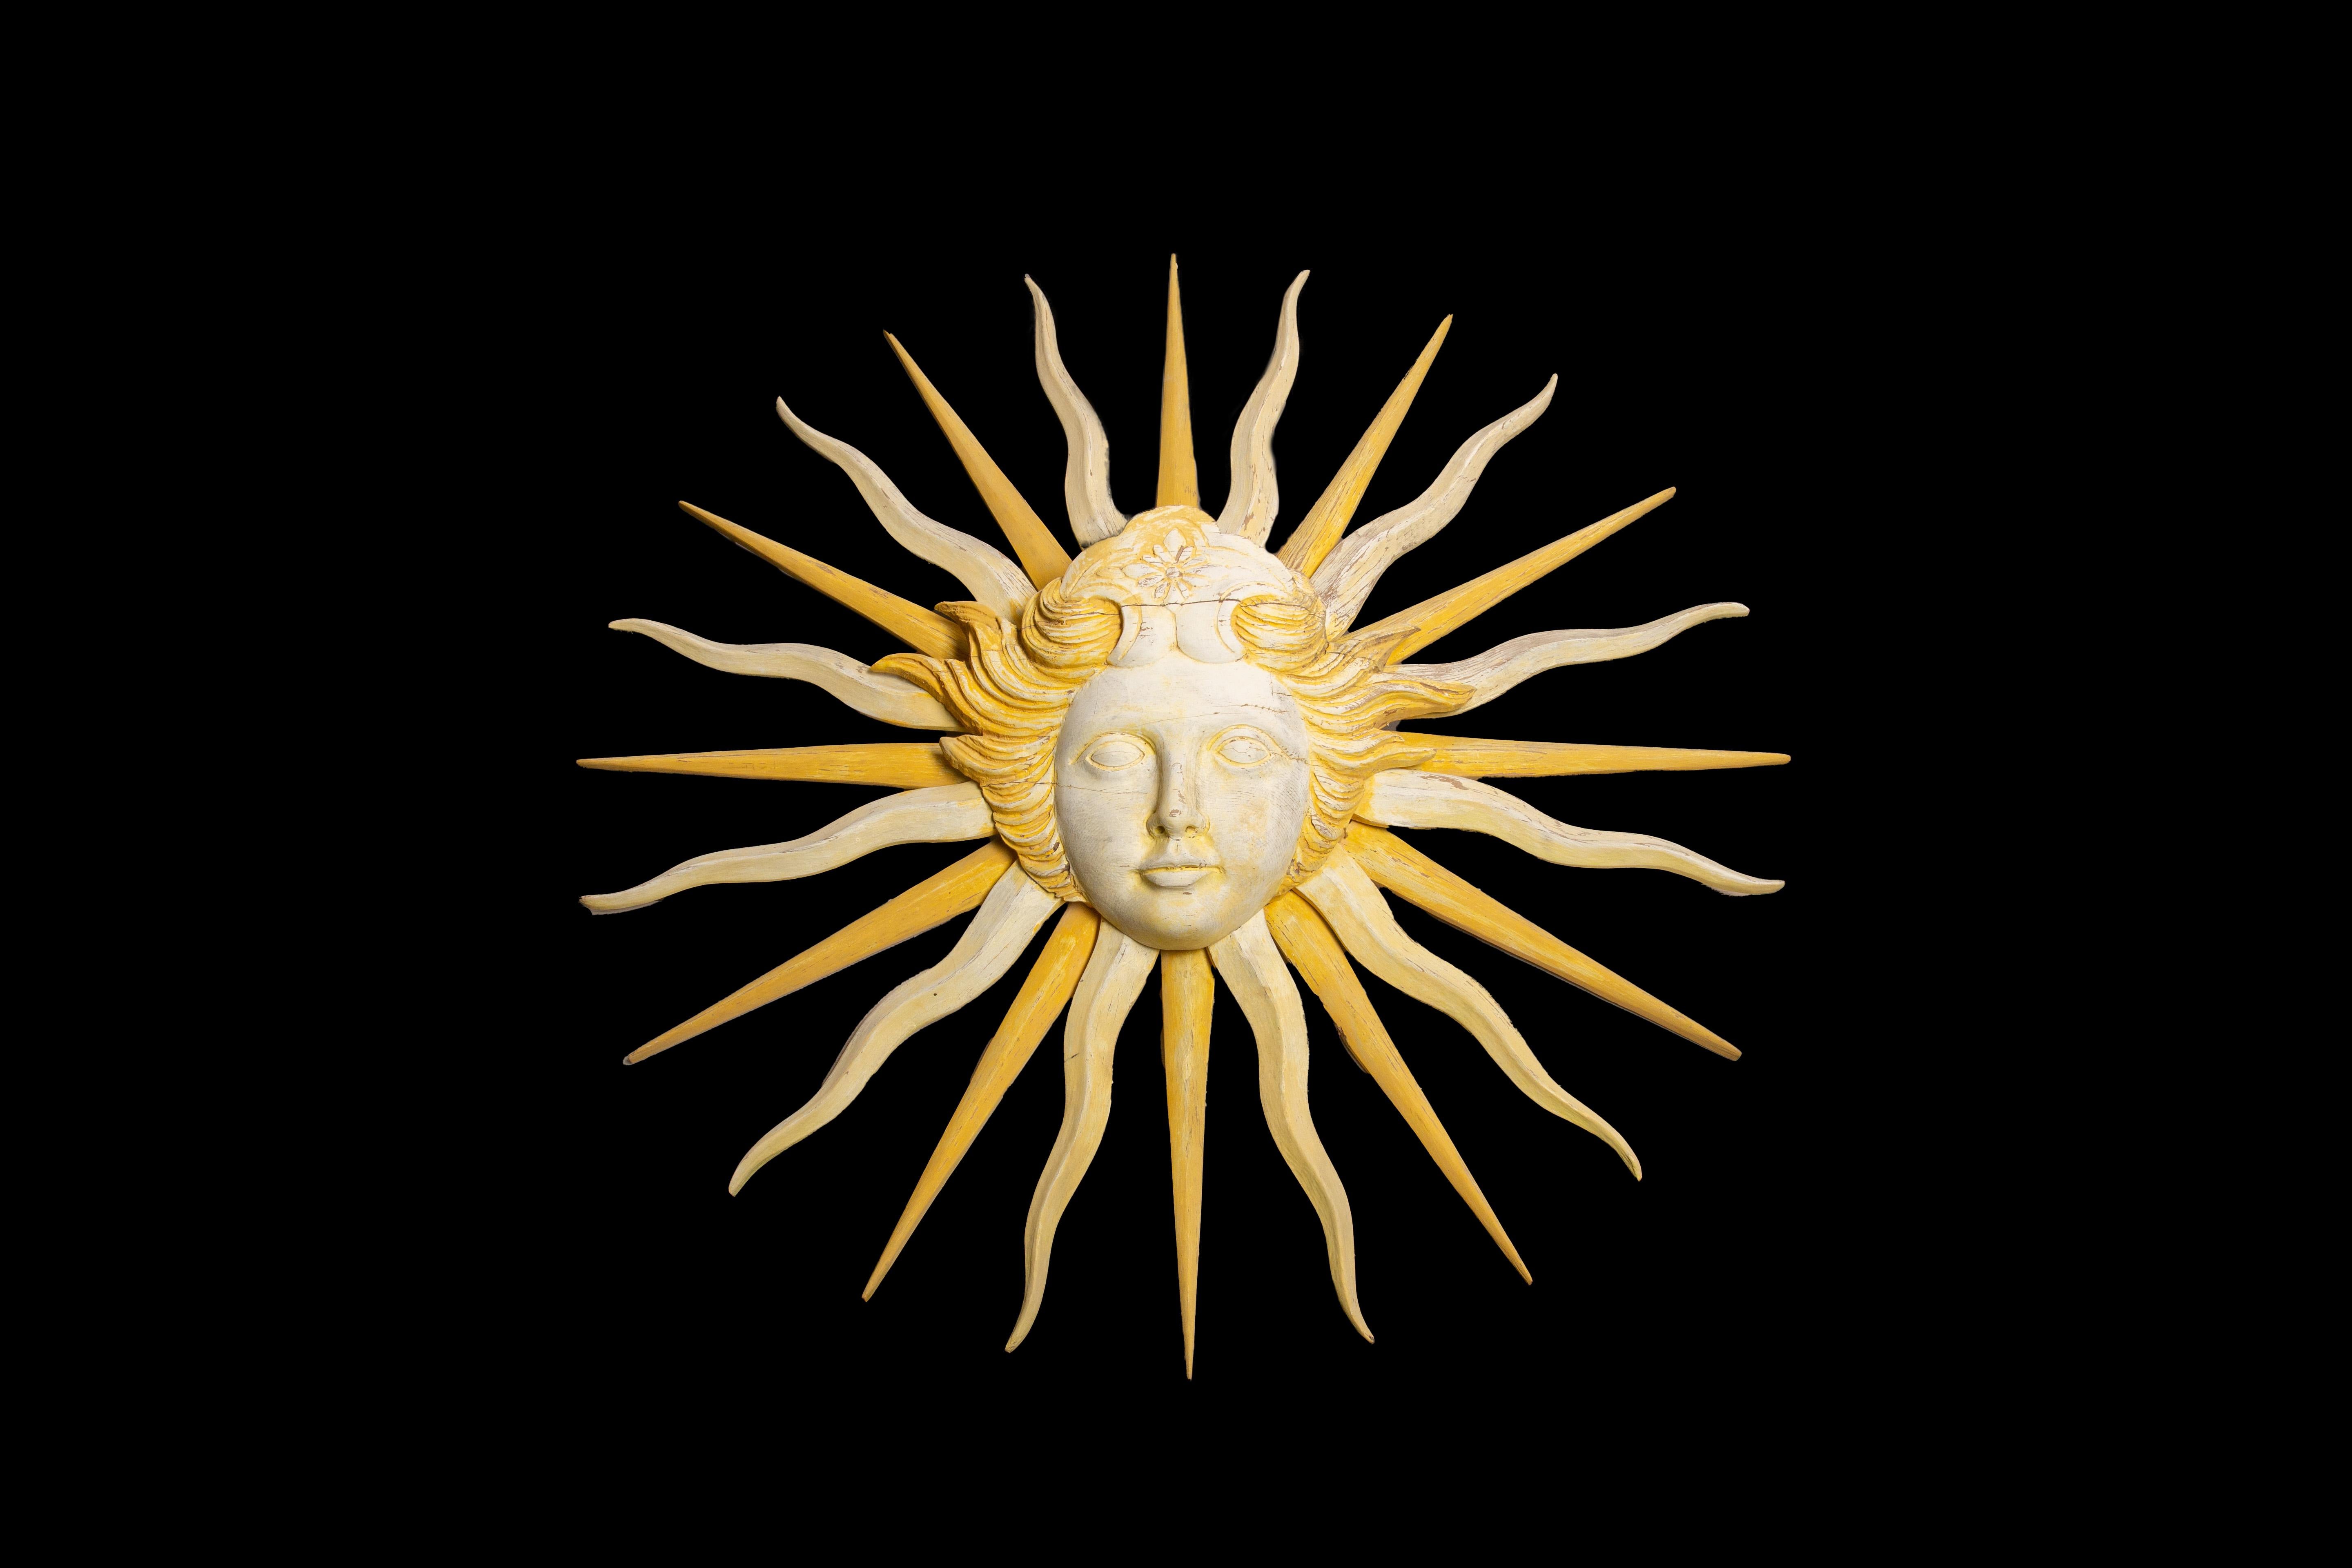 Large Early 20th century Sun King Hand Carved Painted Wood Emblem Sculpture. This magnificent wall hanging captures the elegance and grandeur of the Sun King era. It is hand carved from wood with intricate details and hand painted in vibrant yellow